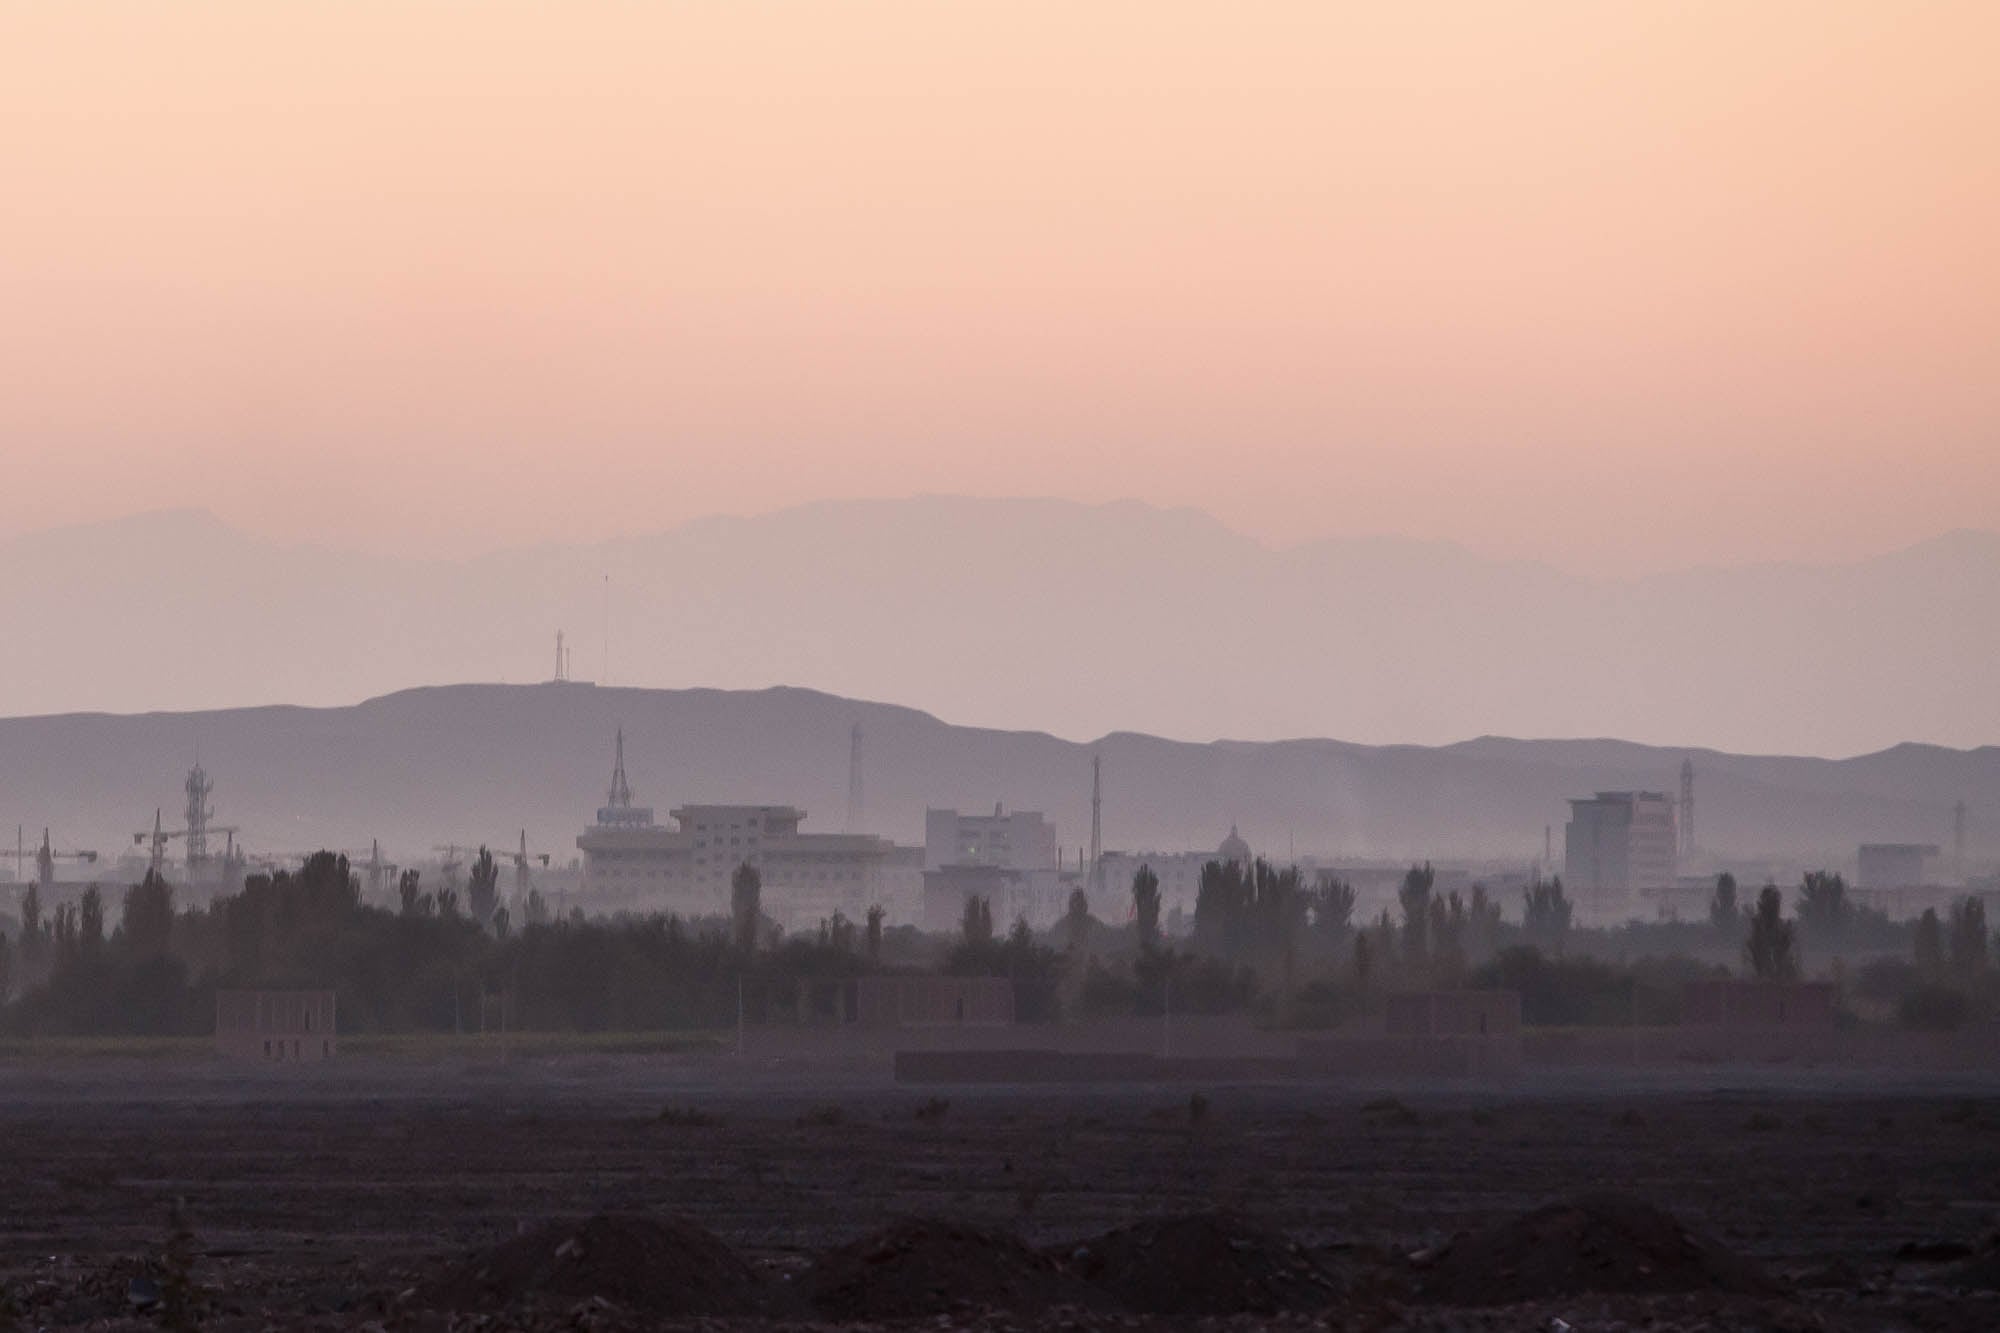 Turpan from the distance